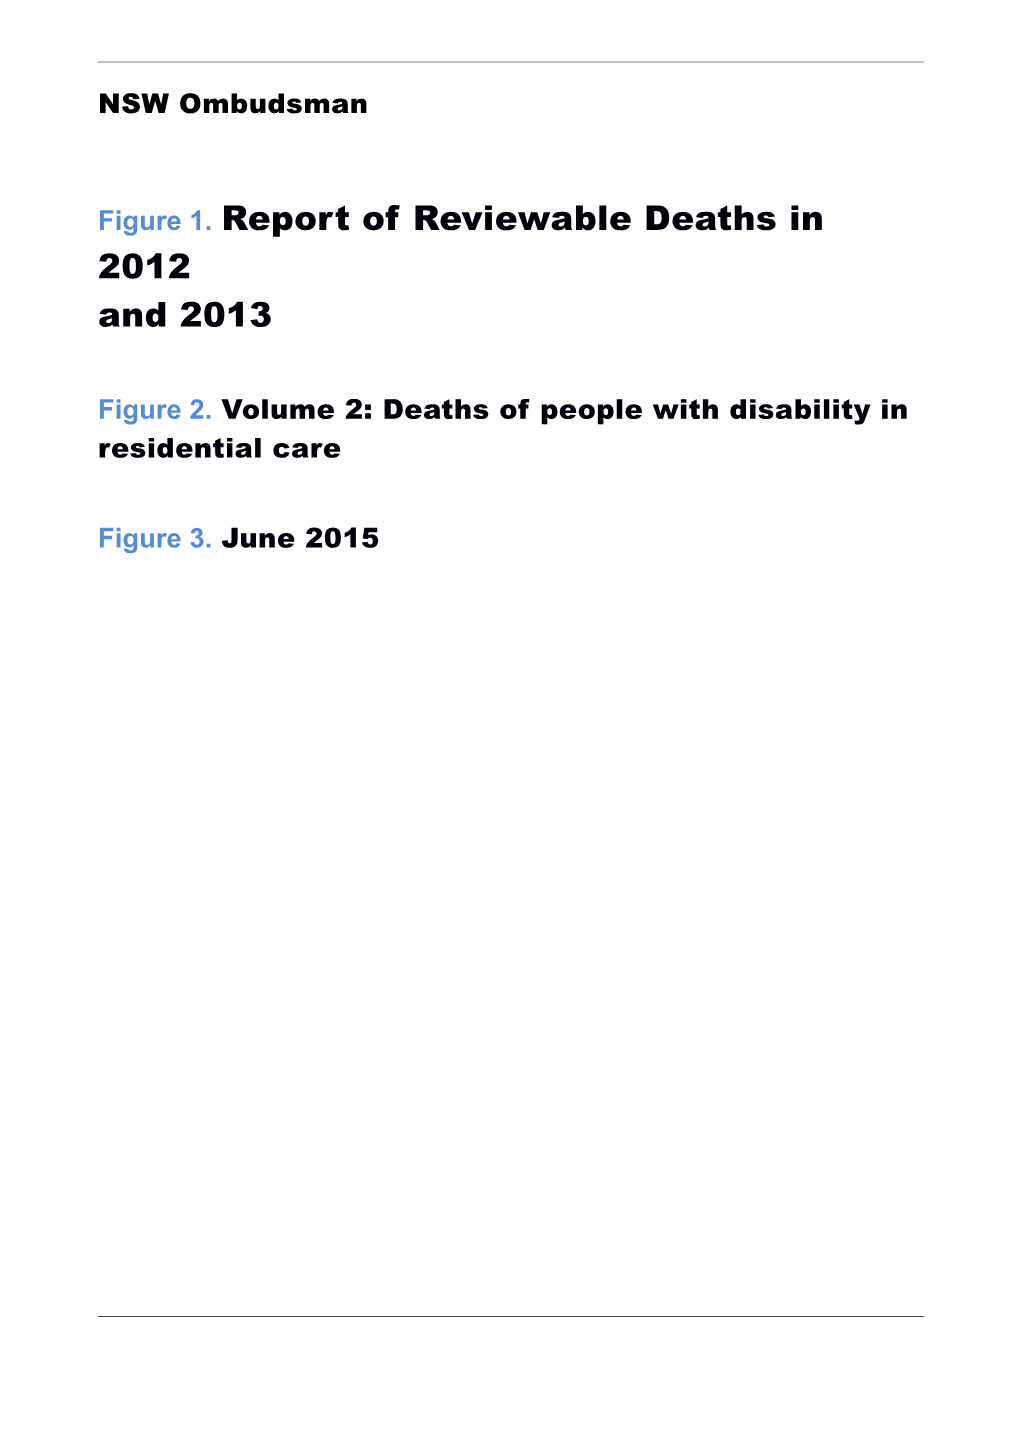 Report of Reviewable Deaths in 2012 and 2013